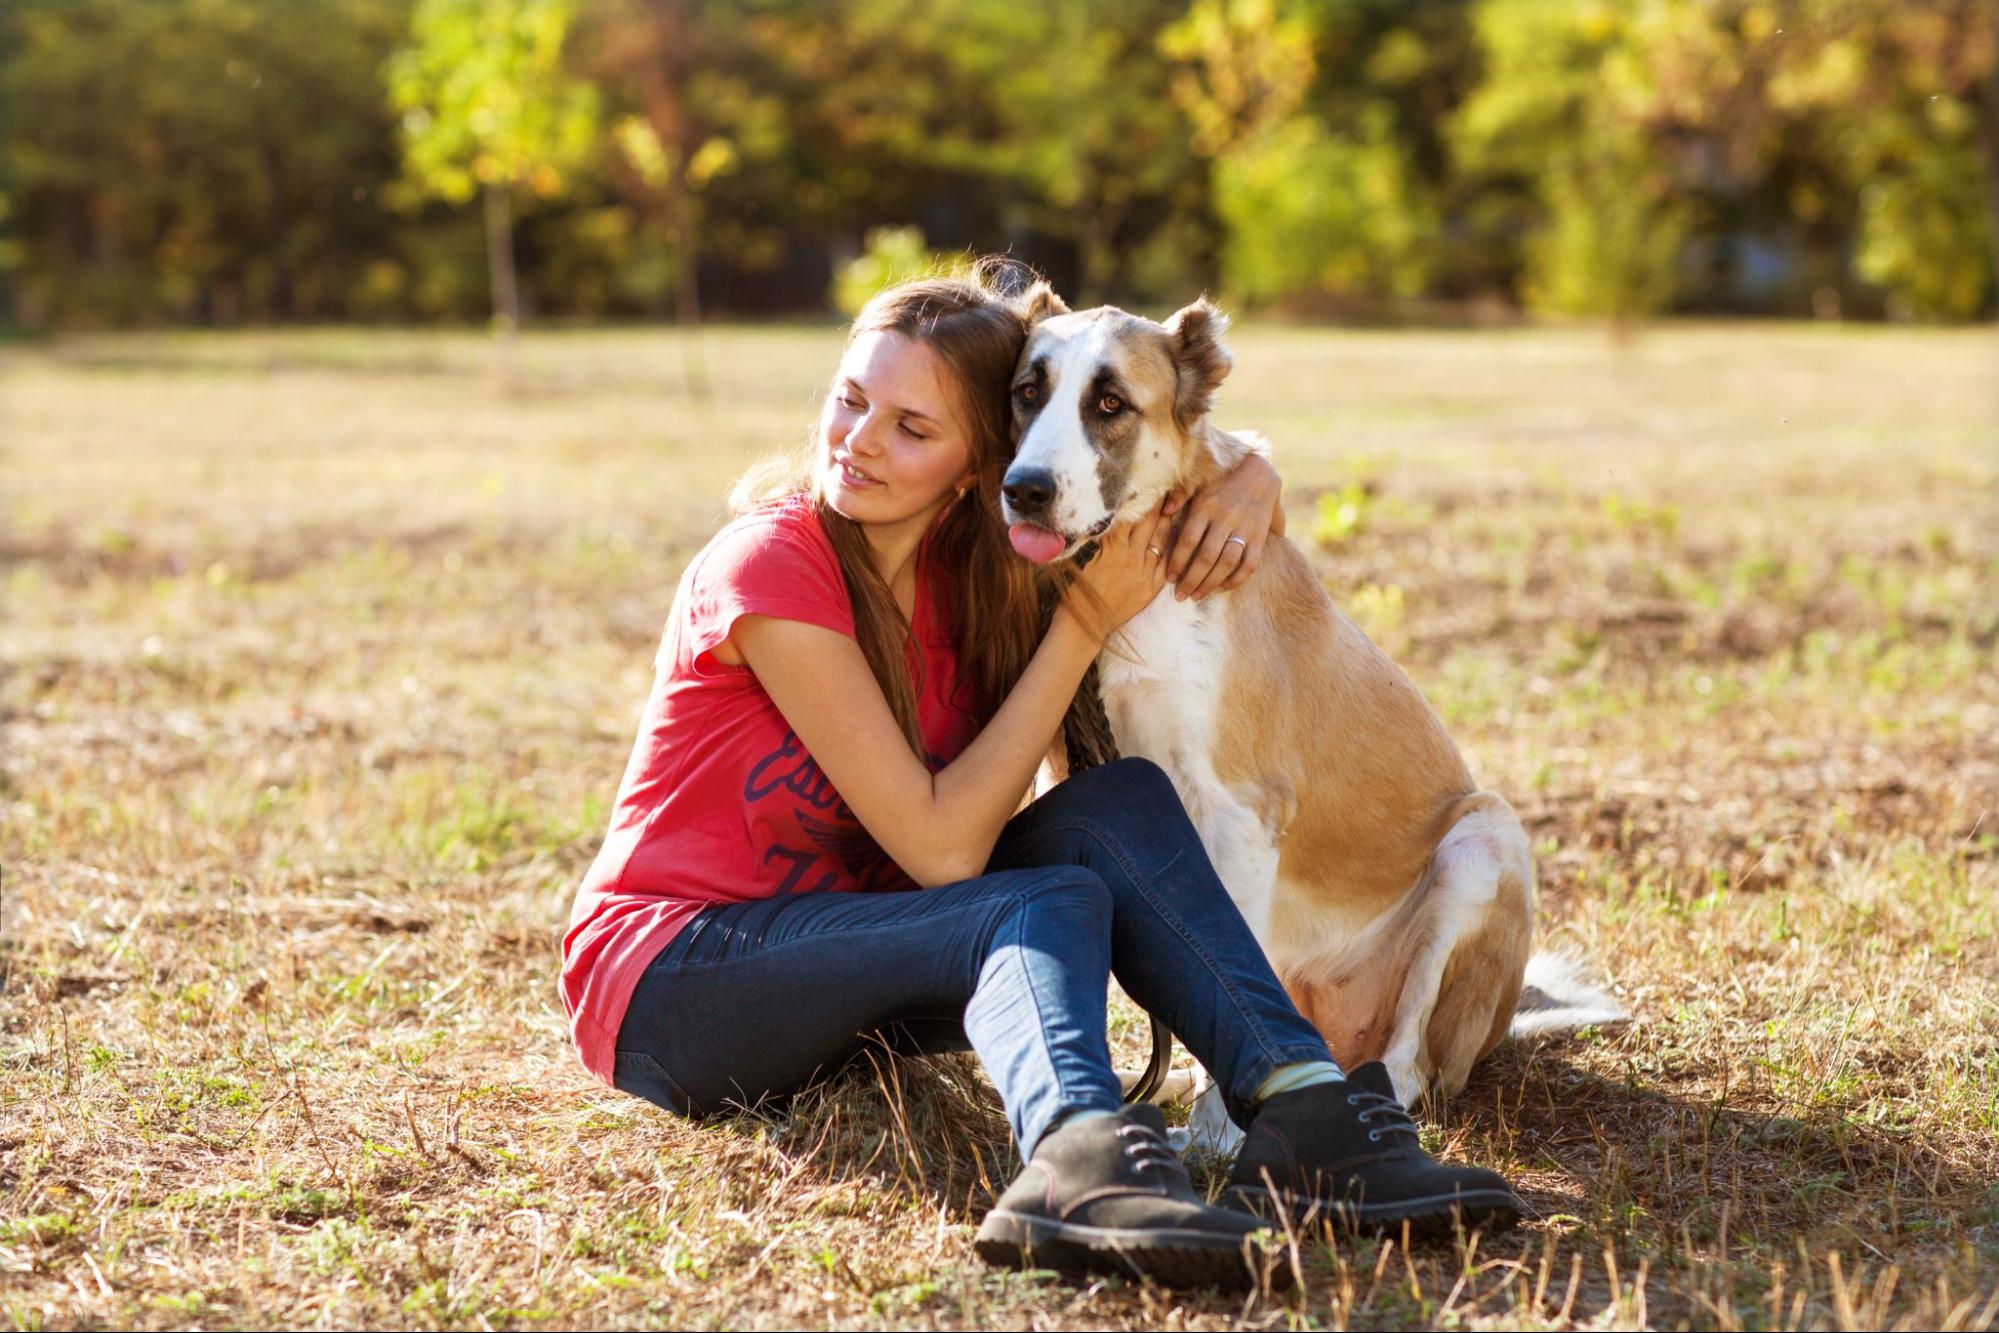 A woman hugs an older dog she adopted from a shelter. Rescue organizations and shelters have a range of dogs from young to old available for adoption.